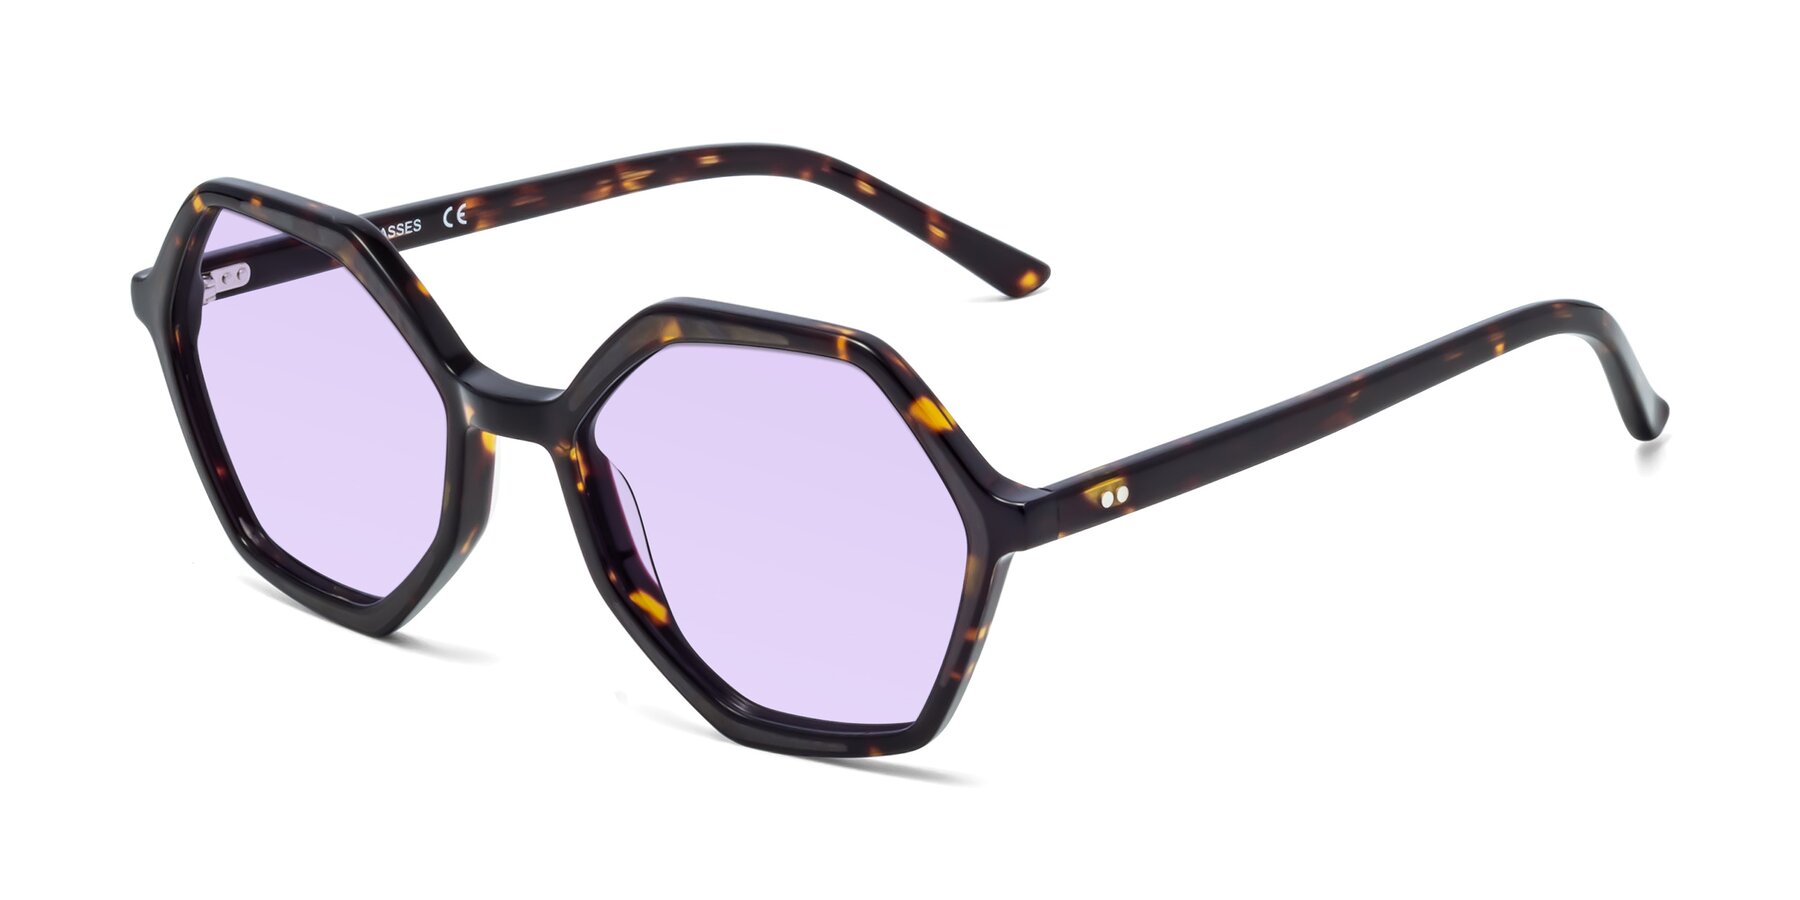 Angle of 1489 in Tortoise with Light Purple Tinted Lenses